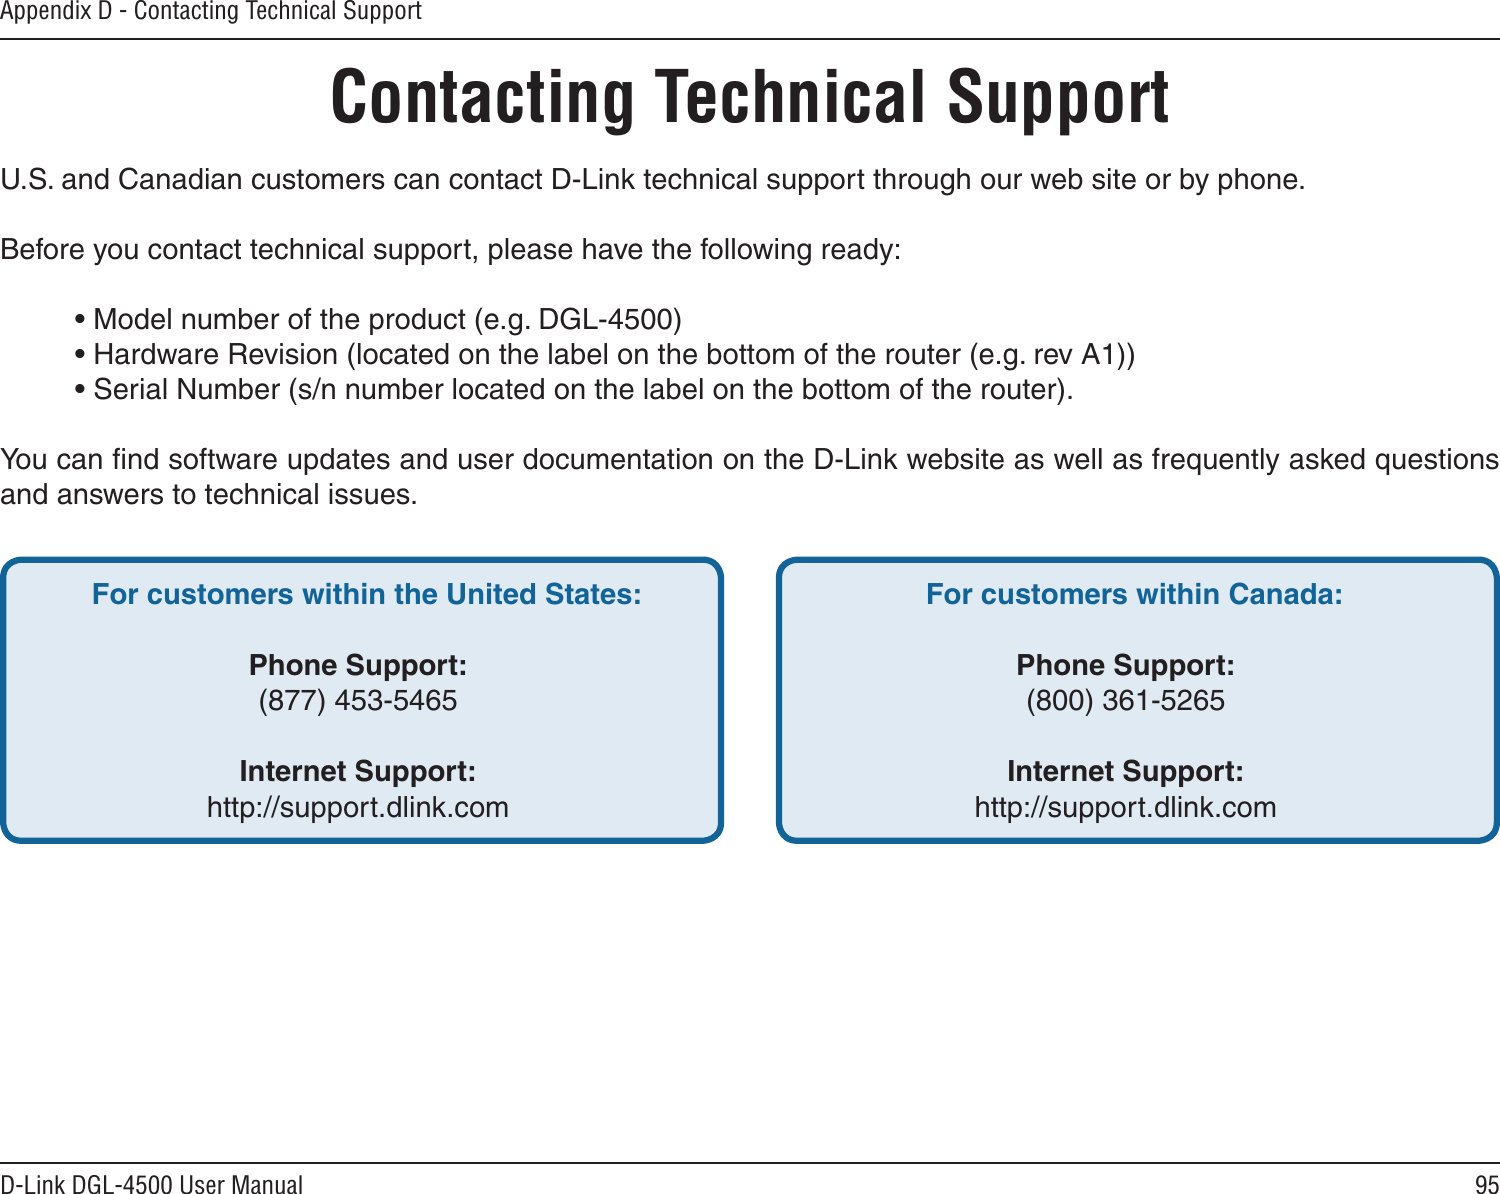 95D-Link DGL-4500 User ManualAppendix D - Contacting Technical SupportContacting Technical SupportU.S. and Canadian customers can contact D-Link technical support through our web site or by phone.Before you contact technical support, please have the following ready:  • Model number of the product (e.g. DGL-4500)  • Hardware Revision (located on the label on the bottom of the router (e.g. rev A1))  • Serial Number (s/n number located on the label on the bottom of the router). You can ﬁnd software updates and user documentation on the D-Link website as well as frequently asked questions and answers to technical issues.For customers within the United States: Phone Support:(877) 453-5465Internet Support:http://support.dlink.com For customers within Canada: Phone Support:(800) 361-5265 Internet Support:http://support.dlink.com 